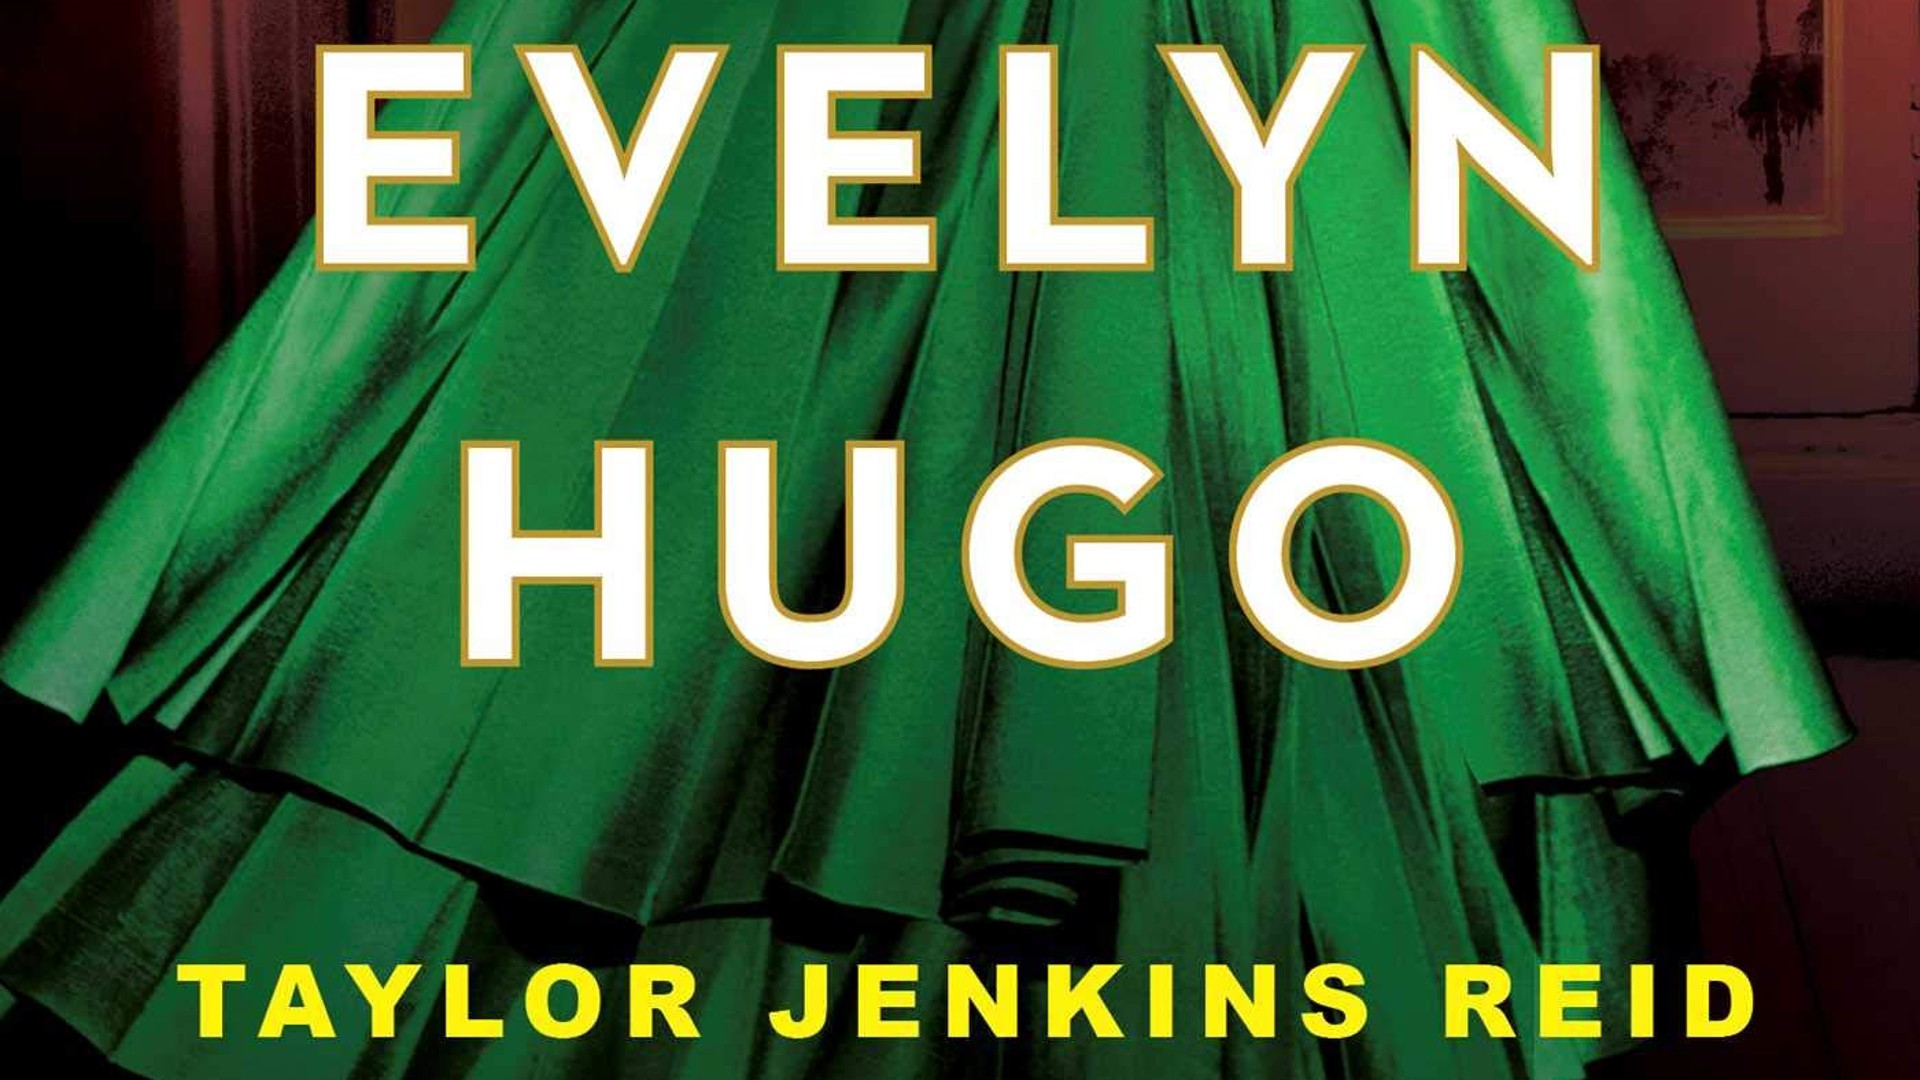 What's Going On With Netflix's 'The Seven Husbands of Evelyn Hugo'  Adaptation?